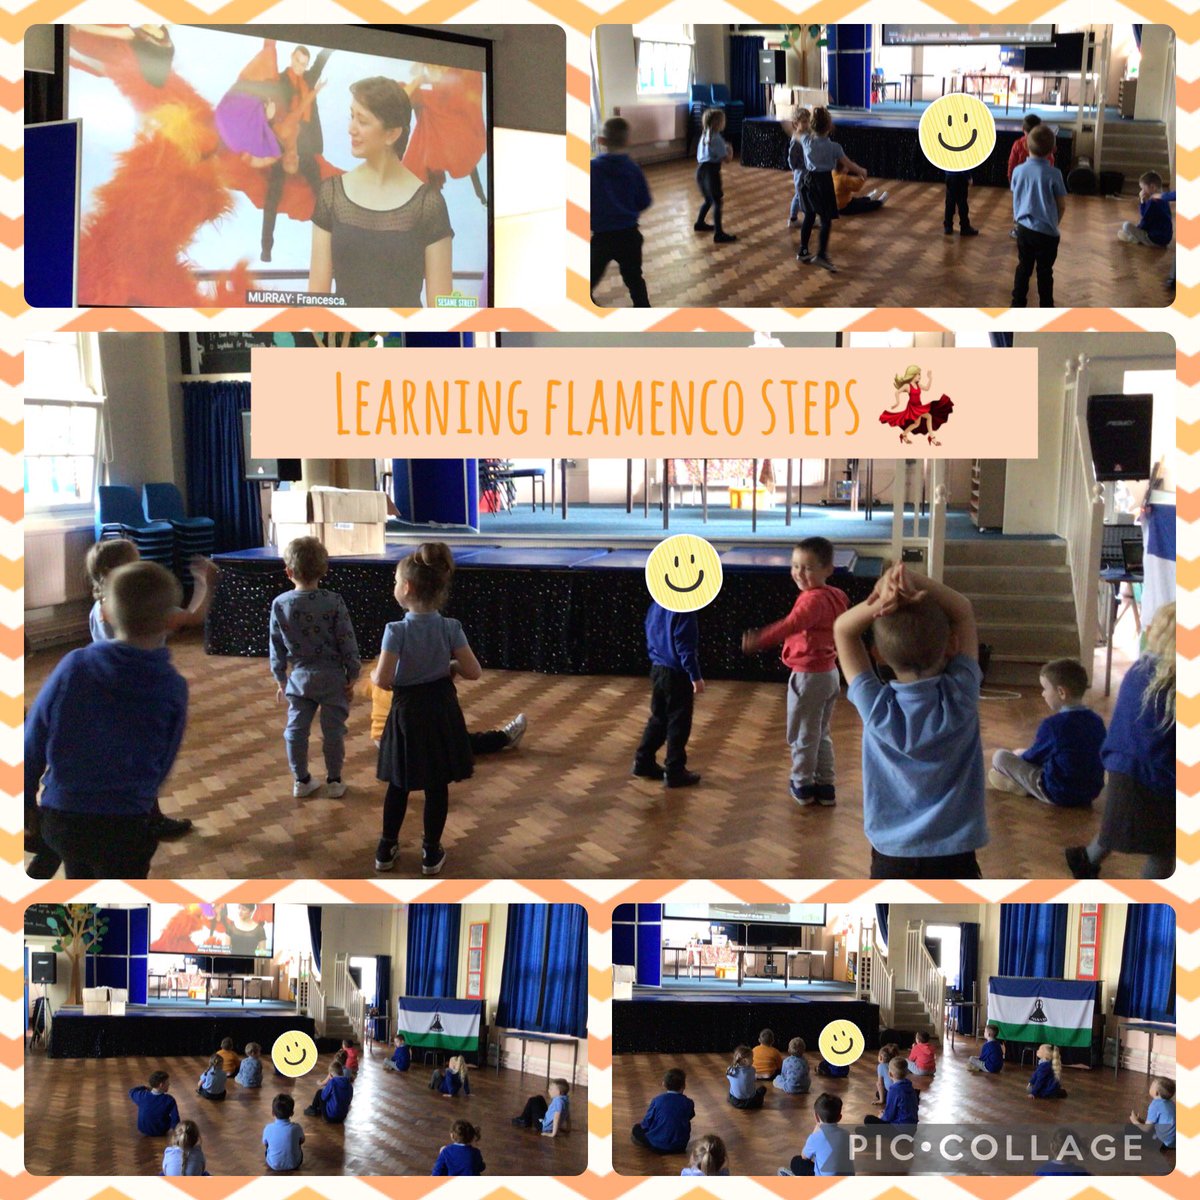 💃🏼🥠FC1🥠💃🏼 We have enjoyed exploring and learning about Spain 🇪🇸 this week. We have been learning how to dance flamenco steps 💃🏼 and today we have been tasting different foods. We really enjoyed the tortillas and the salsa. The churros were yummy too ☺️👍🏼🇪🇸